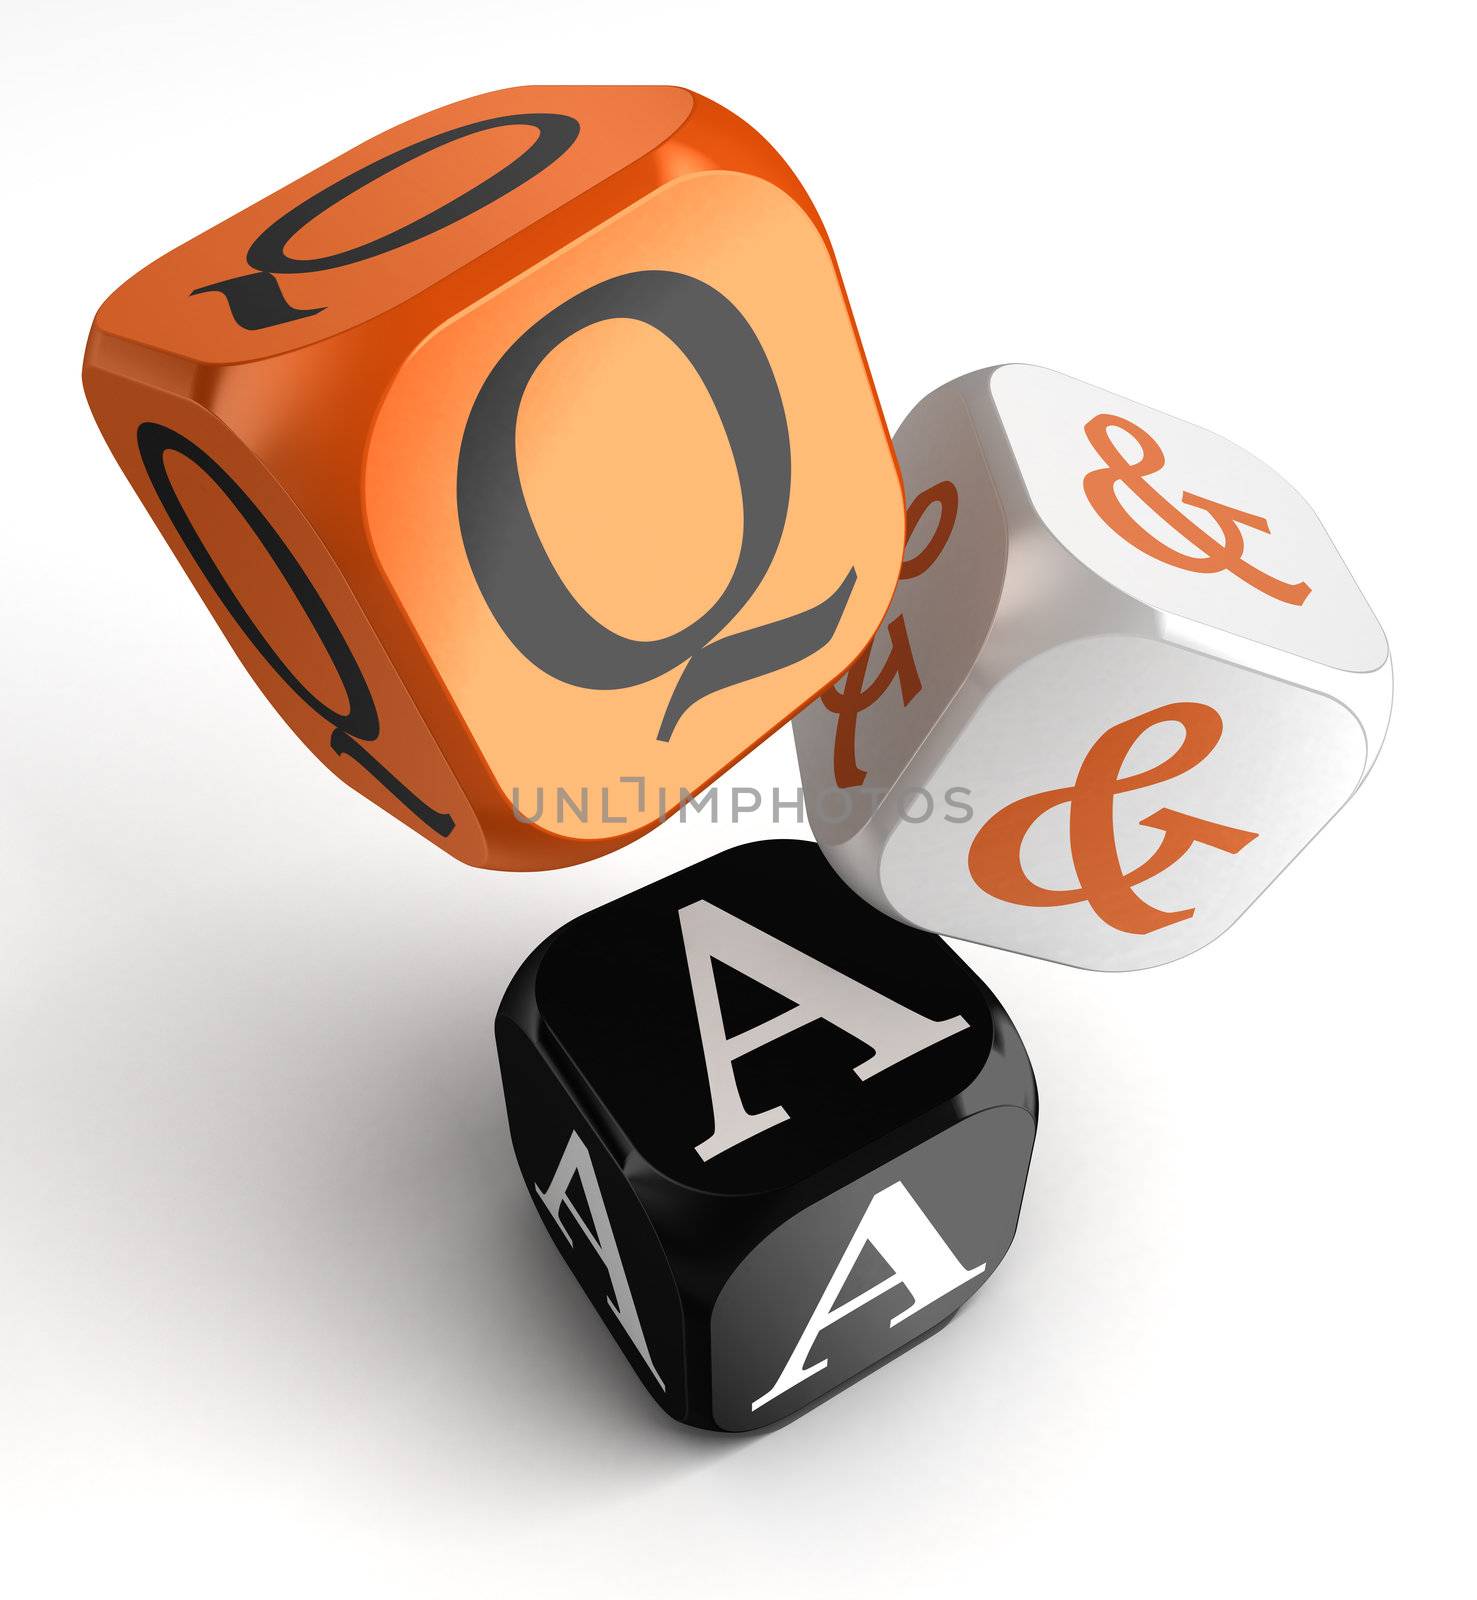 questions and answers orange black dice blocks on white background. clipping path included